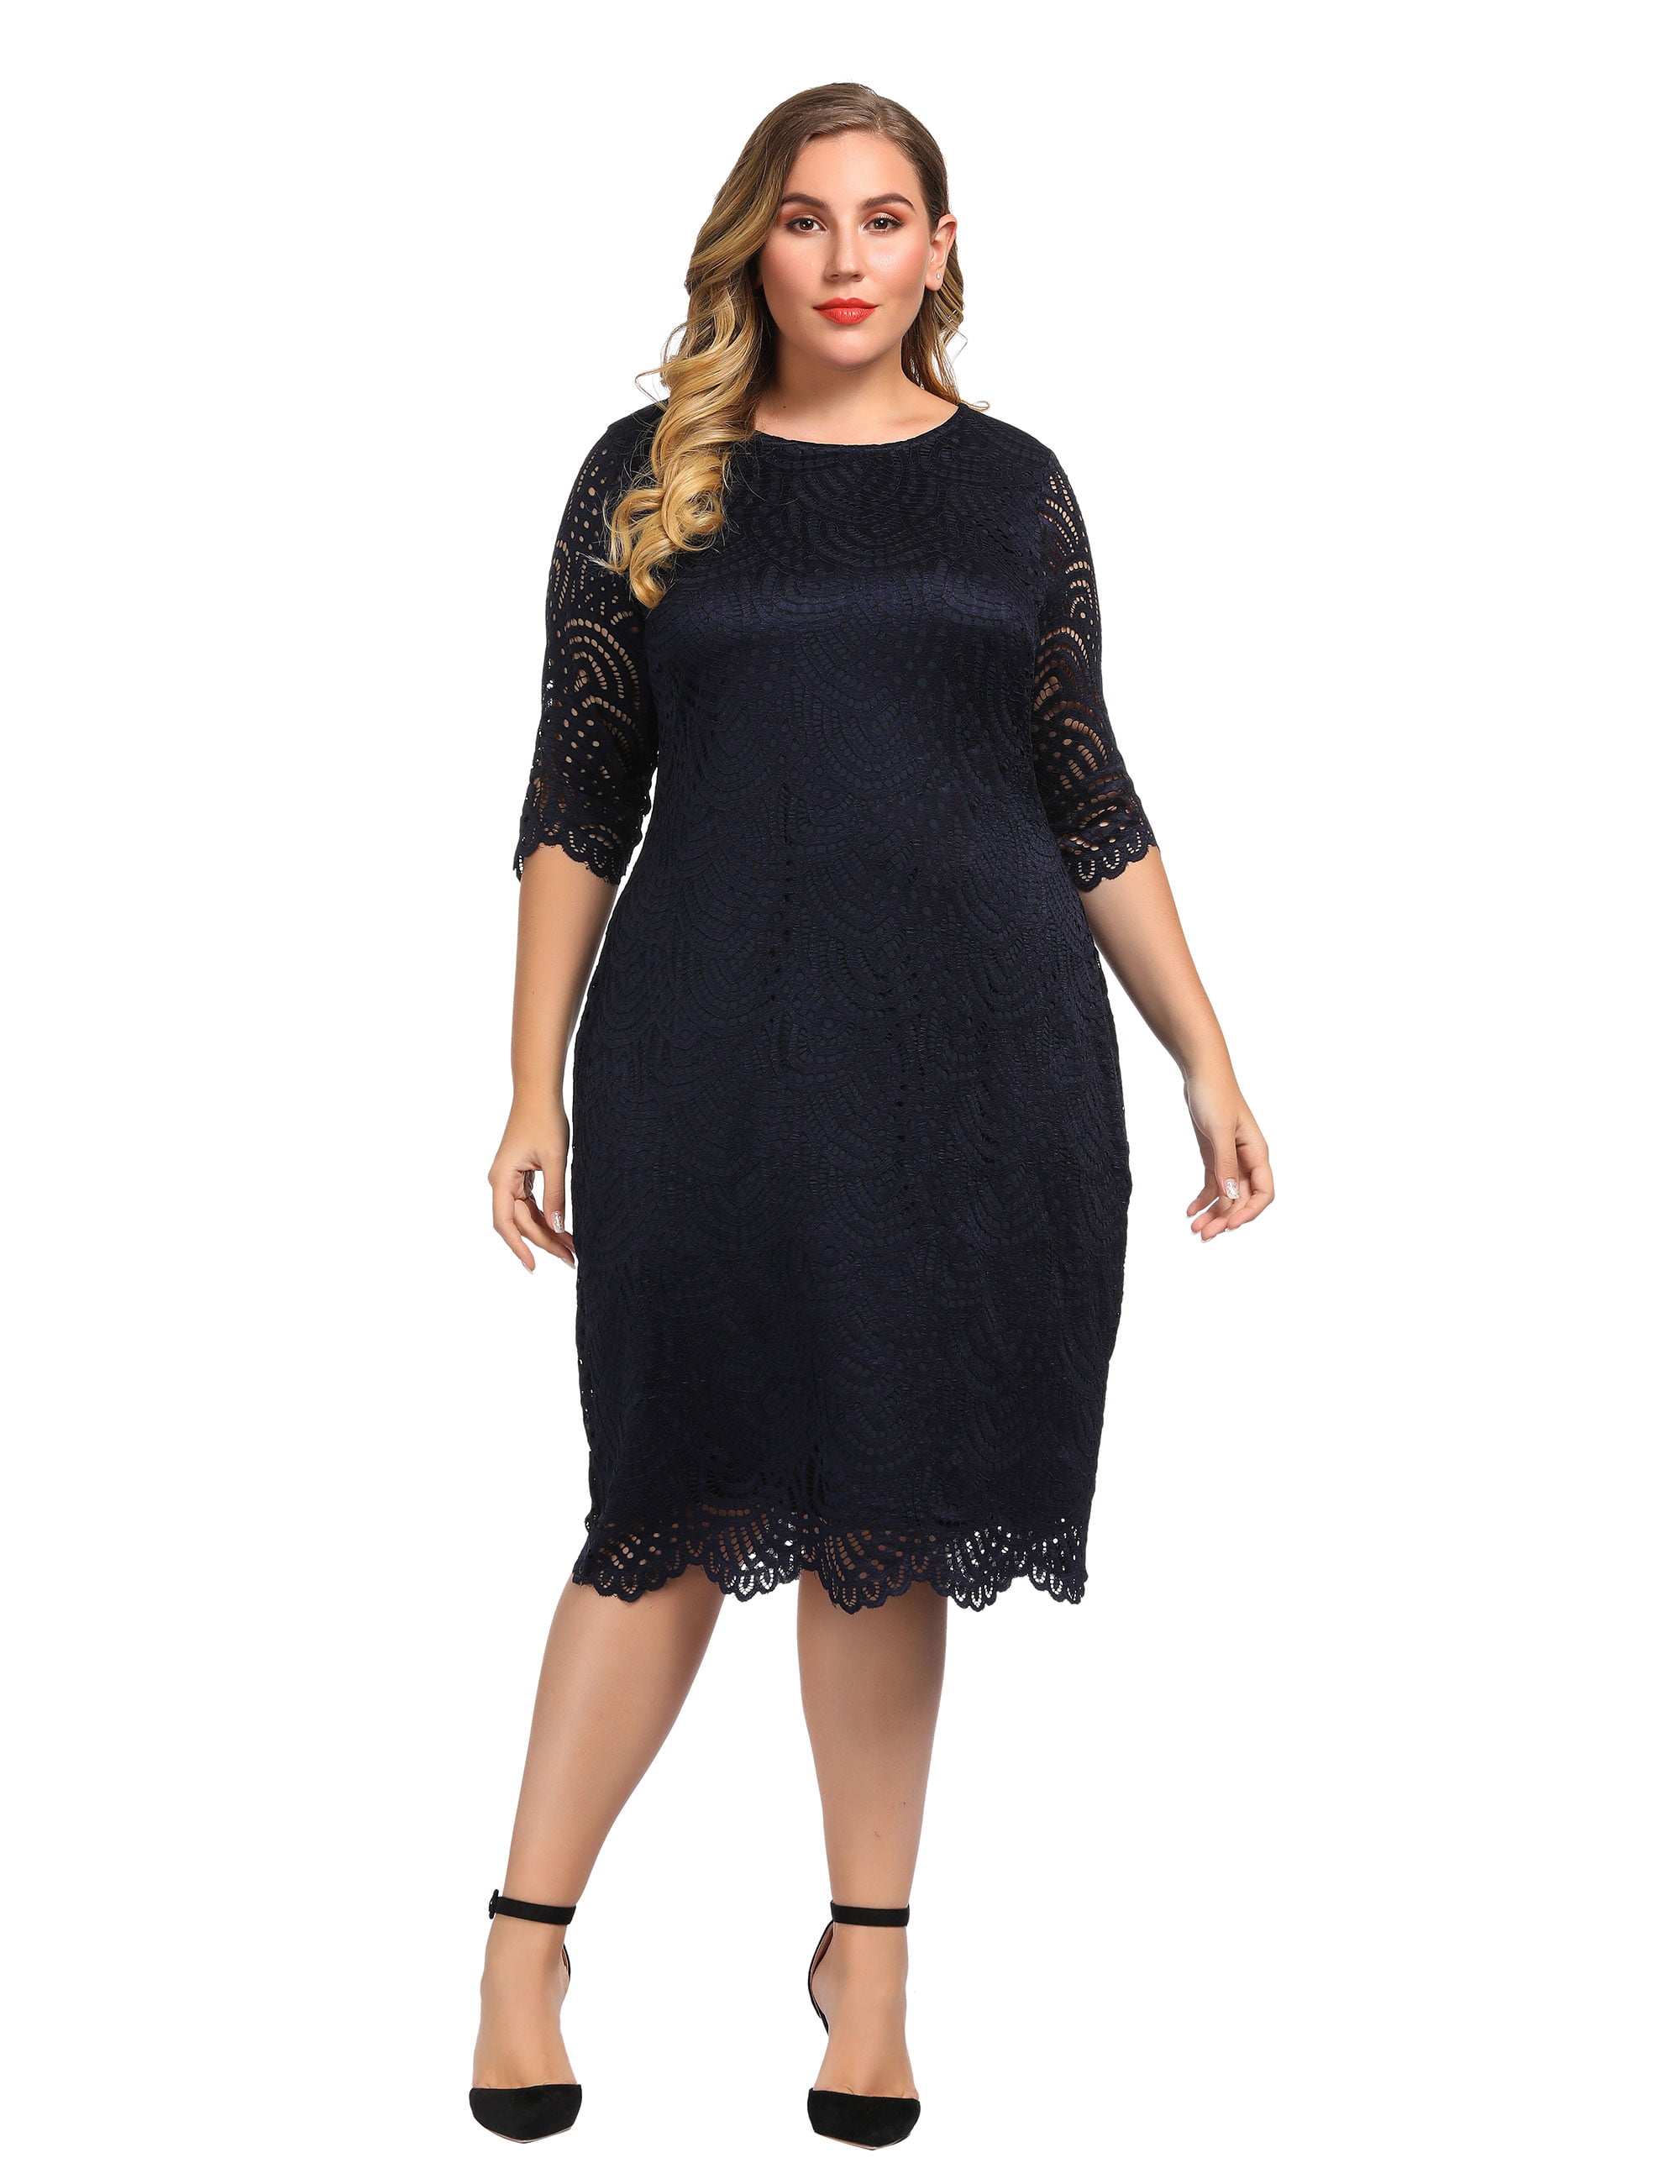 Chicwe Women's Lined Stretch Lace Plus Size Shift Dress with Scalloped ...